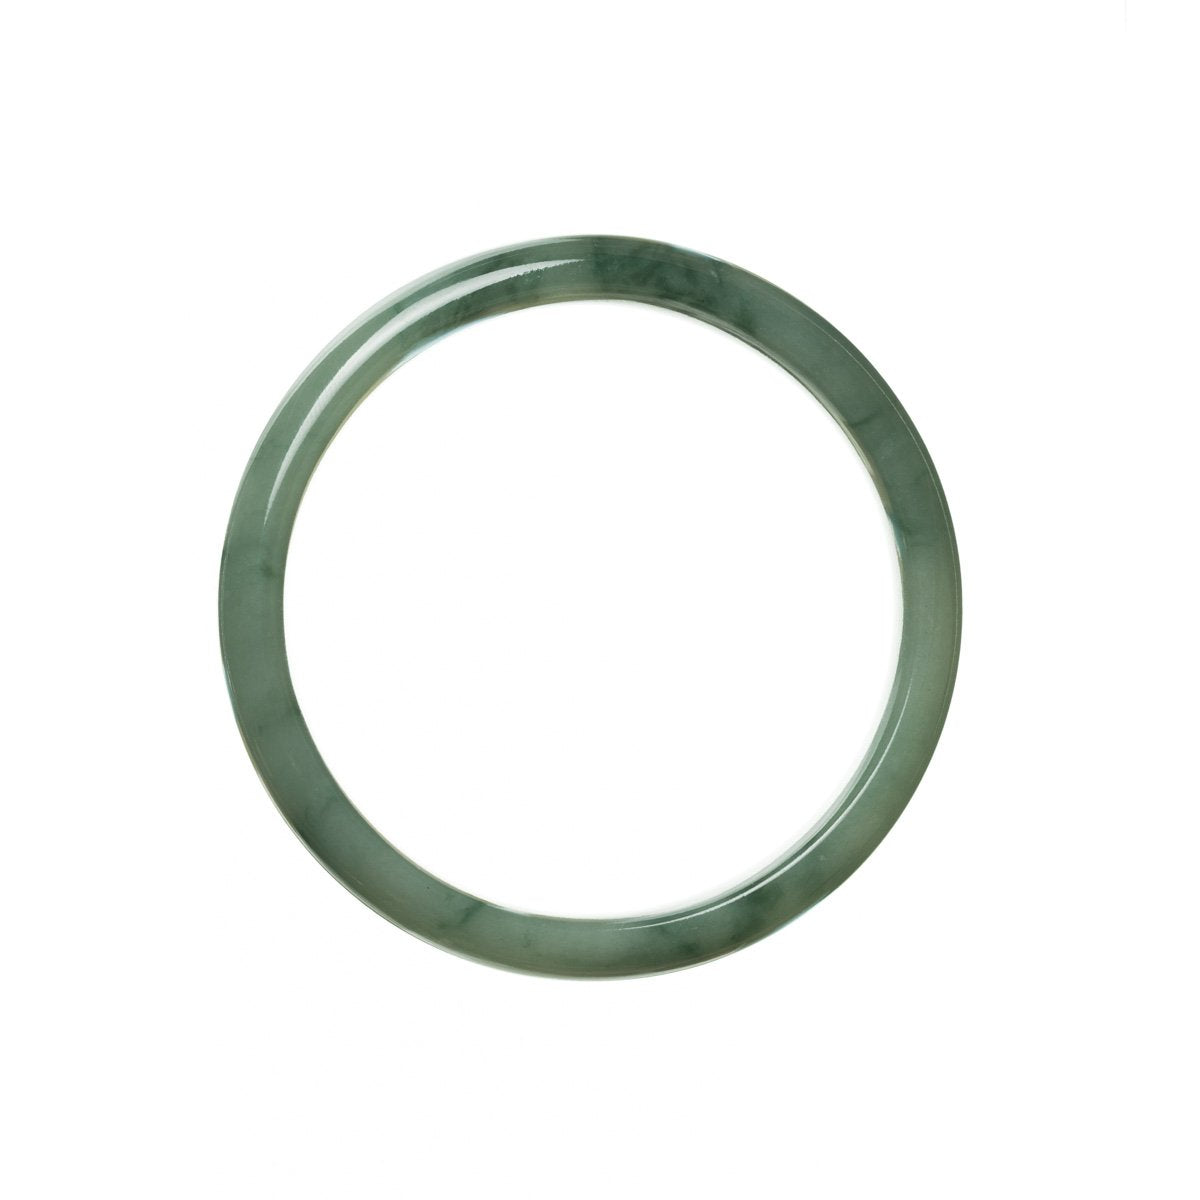 A close-up photograph of a vibrant green jadeite bangle with a smooth, half-moon shape. The bangle is made of high-quality jadeite and has a diameter of 58mm. It shines under the light, showcasing its natural beauty and elegance.